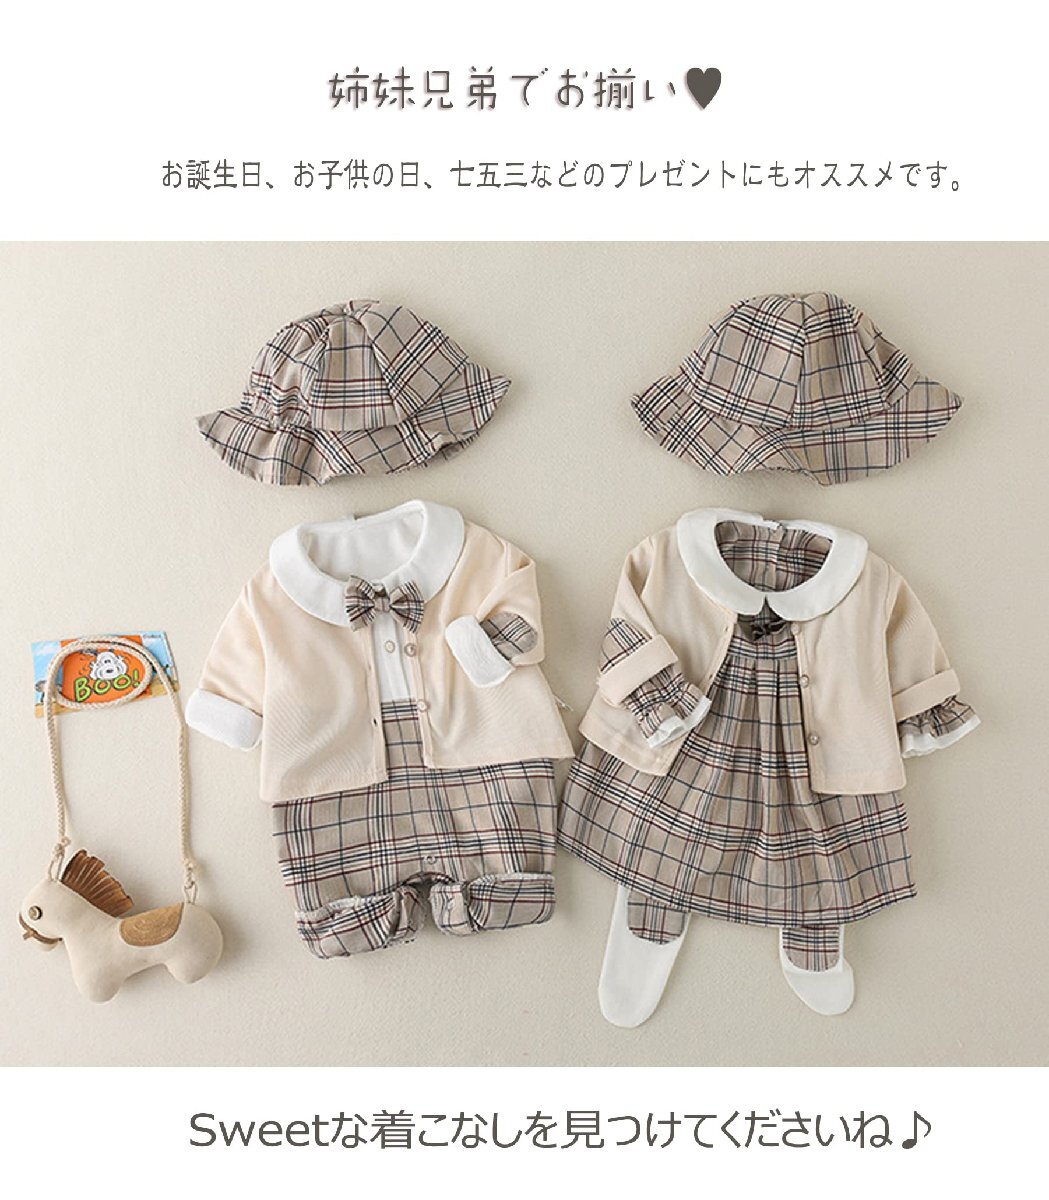 [SLINX] baby man girl One-piece rompers formal hat attaching boys baby long sleeve rompers butterfly necktie check pattern 